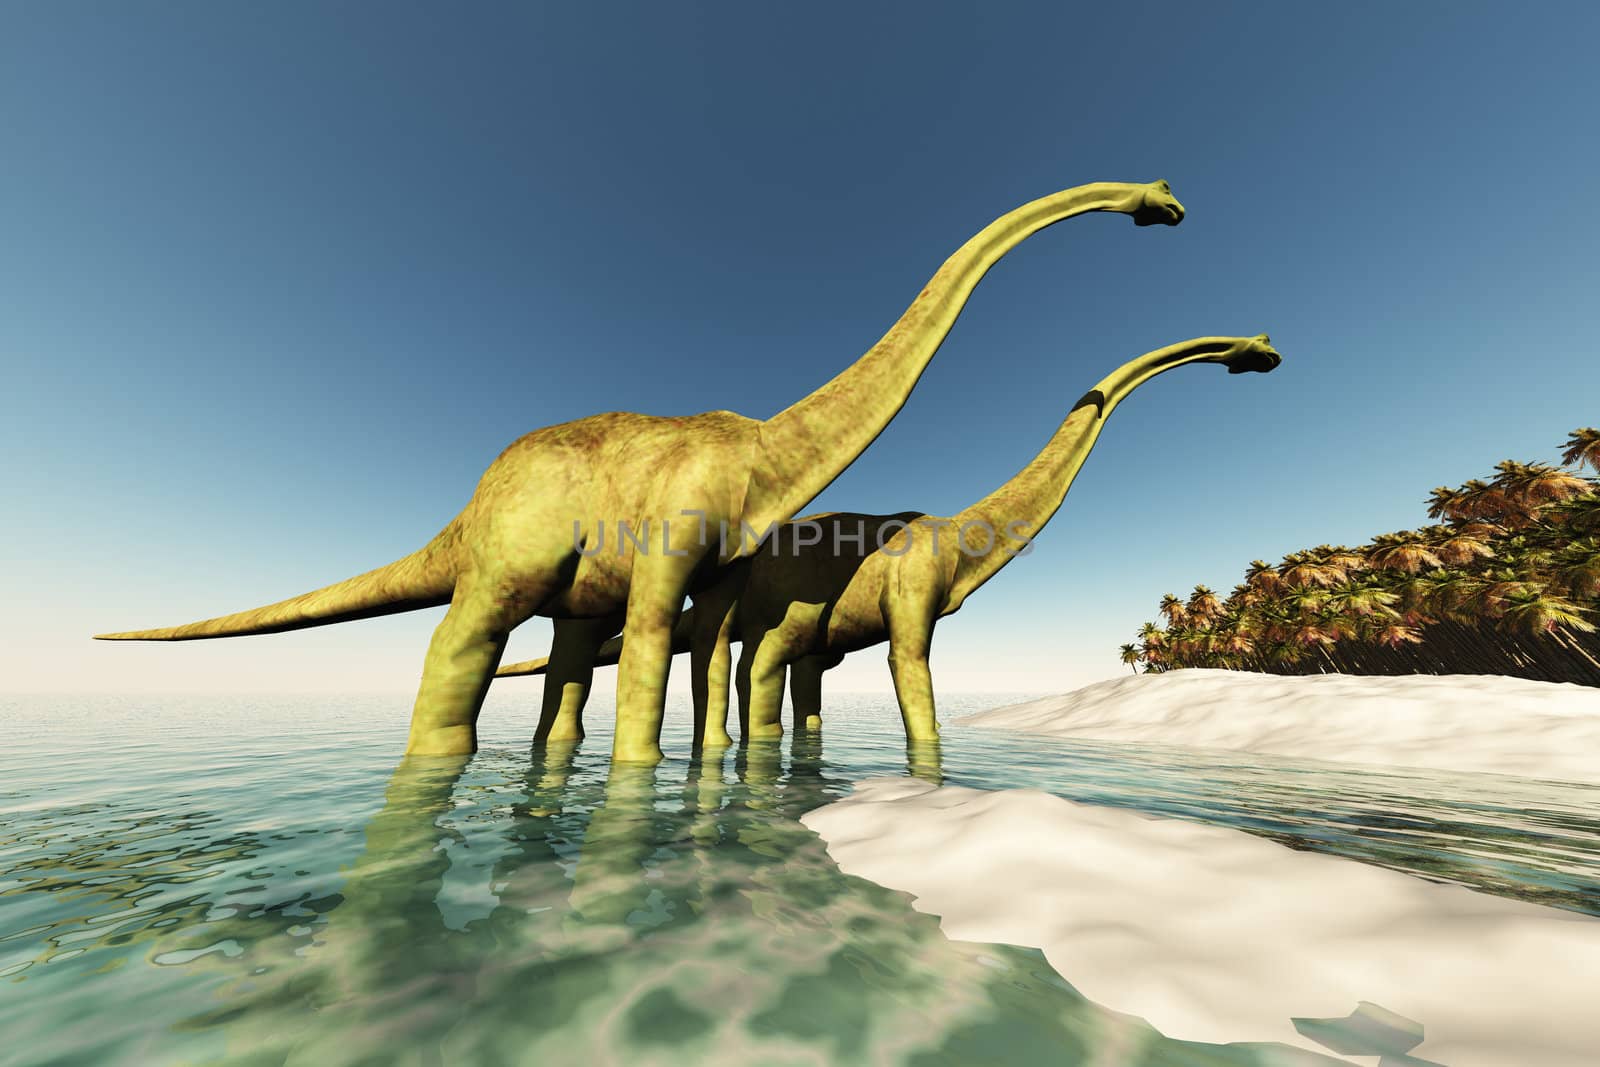 Two Diplodocus dinosaurs wade through shallow waters to get to the vegetation on this island.